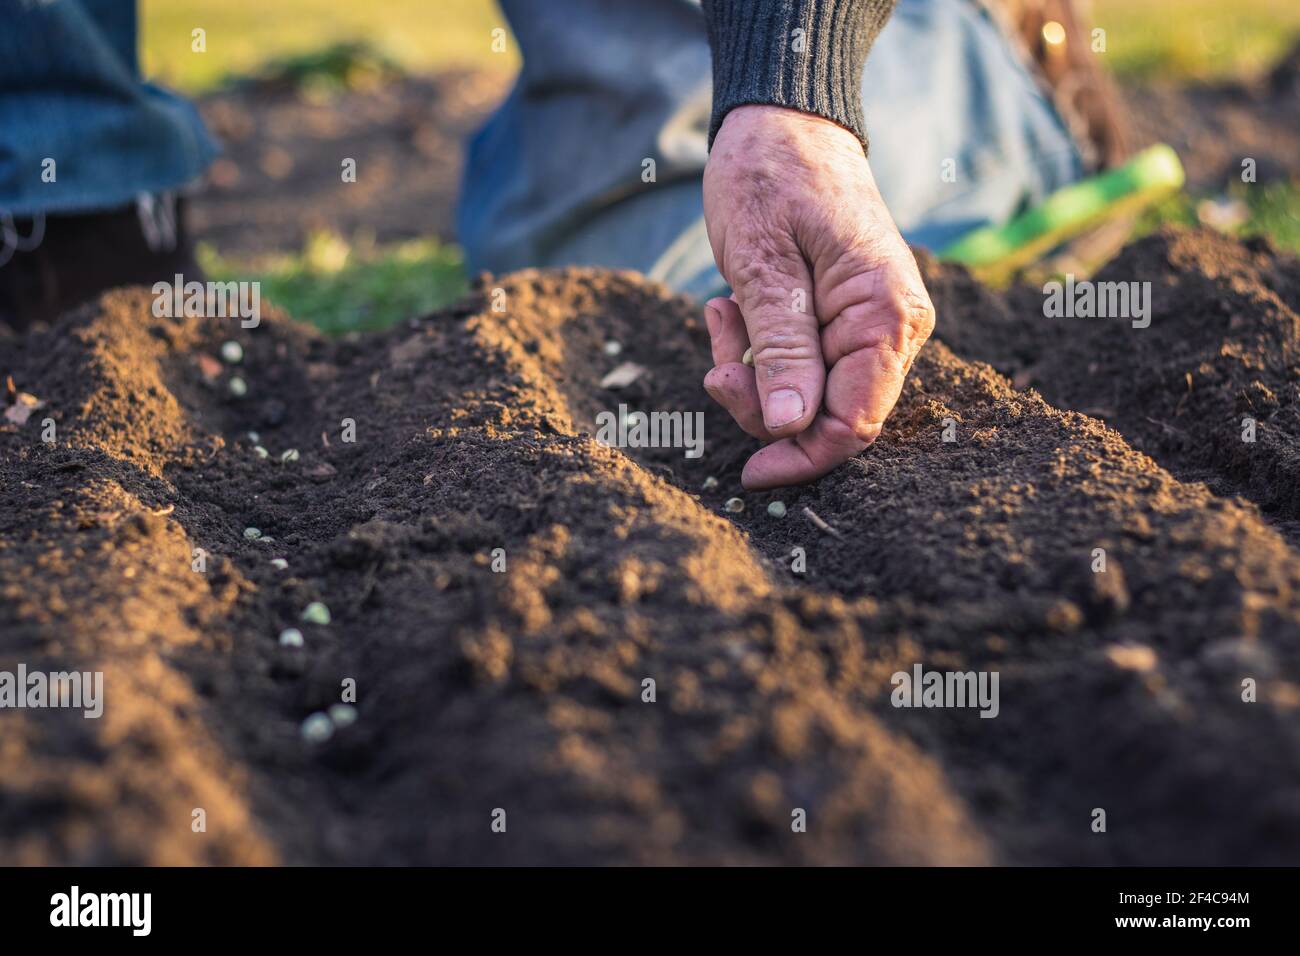 Farmer planting seeds in soil. Gardening in spring. Sowing seed in organic garden. Stock Photo